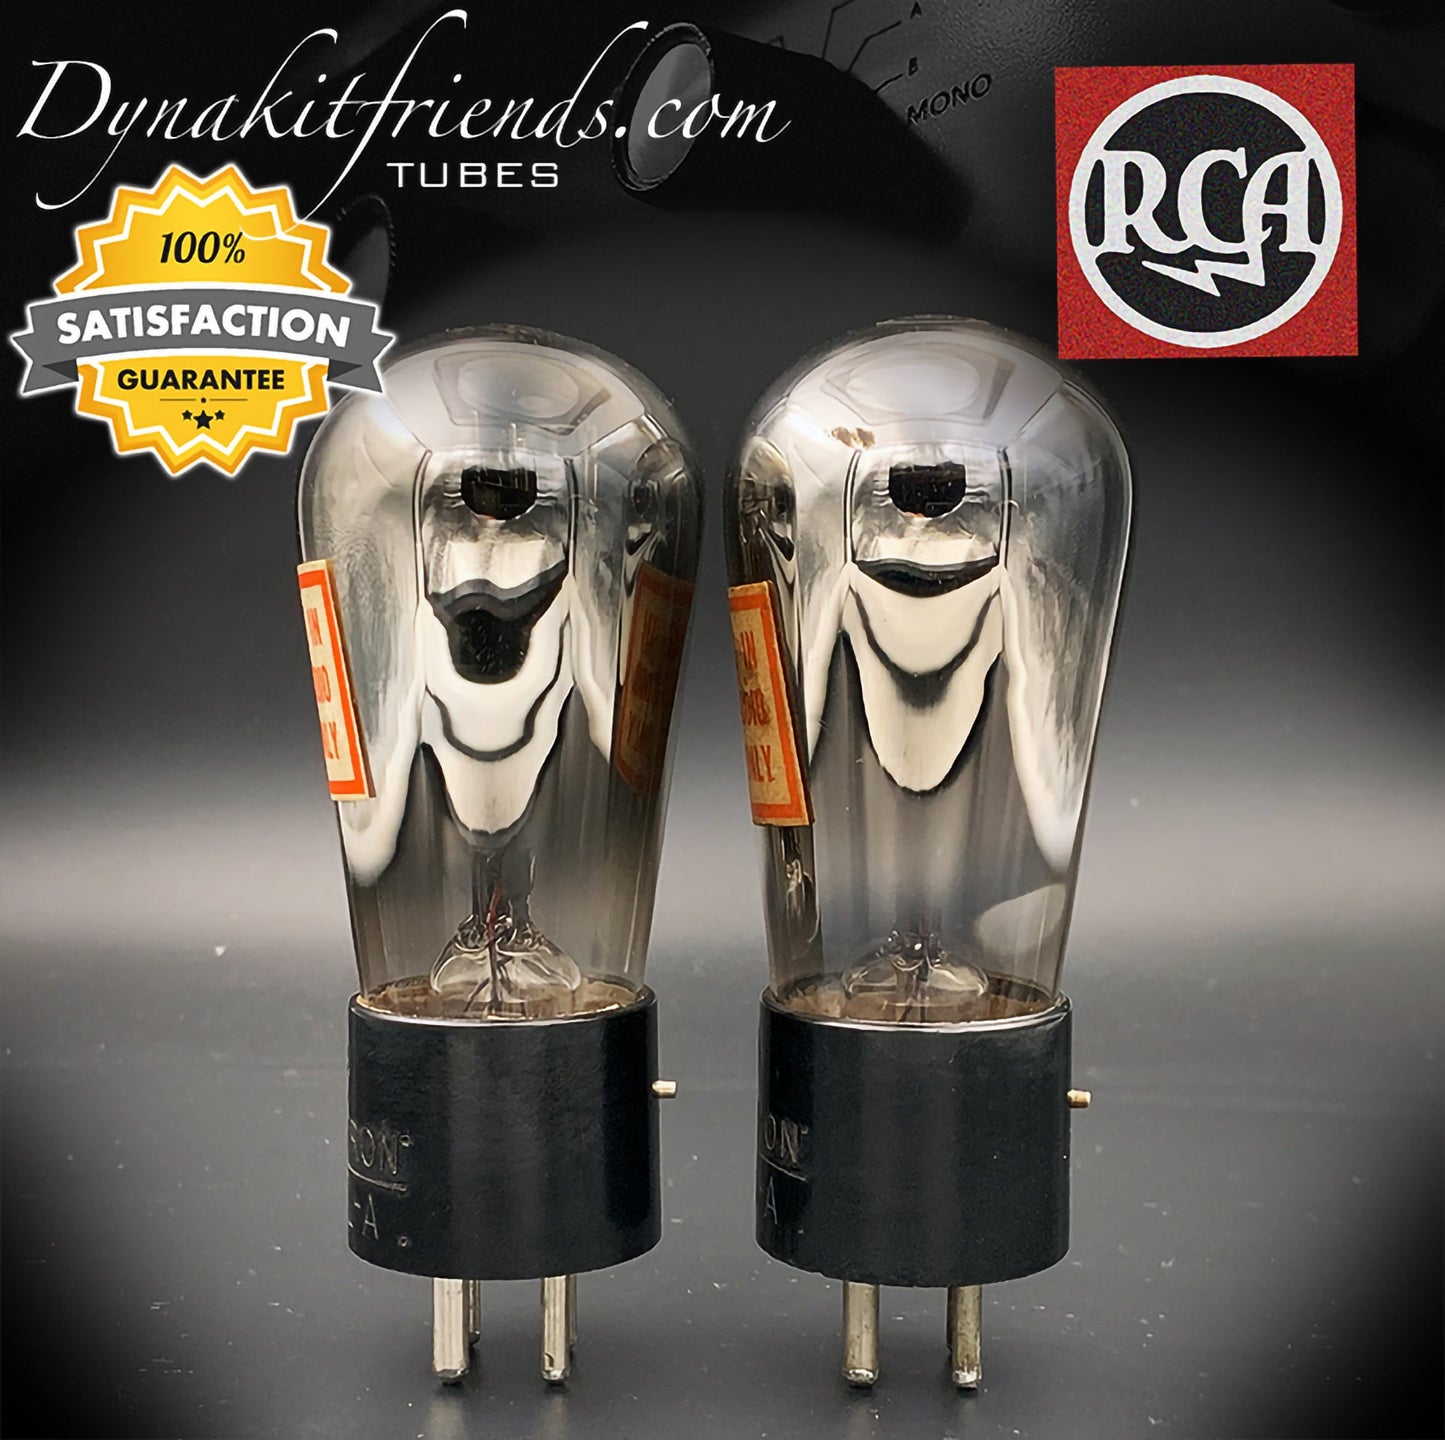 UX171A (71A) RCA NOS Globe Power Triode Matched Pair Tubes Made in USA 1928